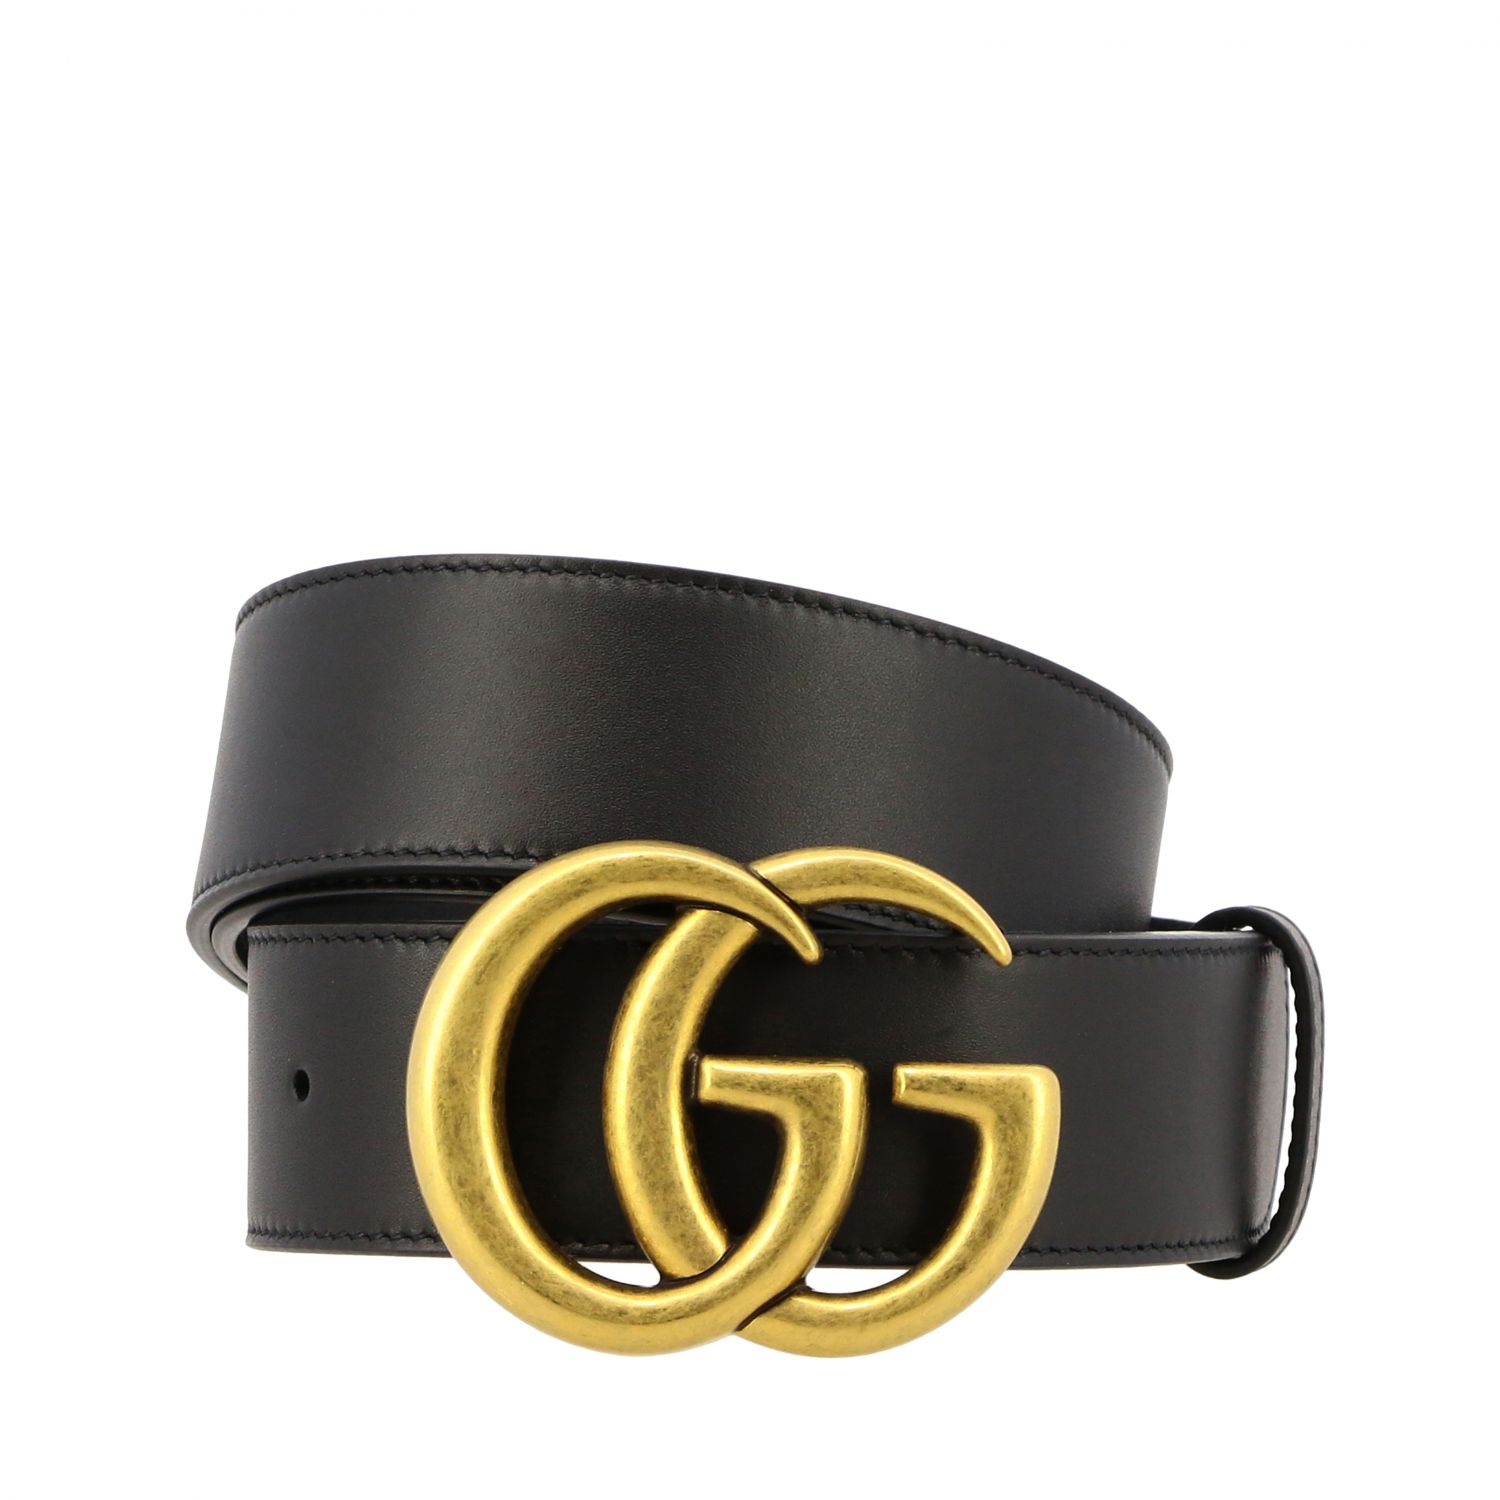 GUCCI: leather belt with GG buckle - Black | Gucci belt 397660 AP00T ...